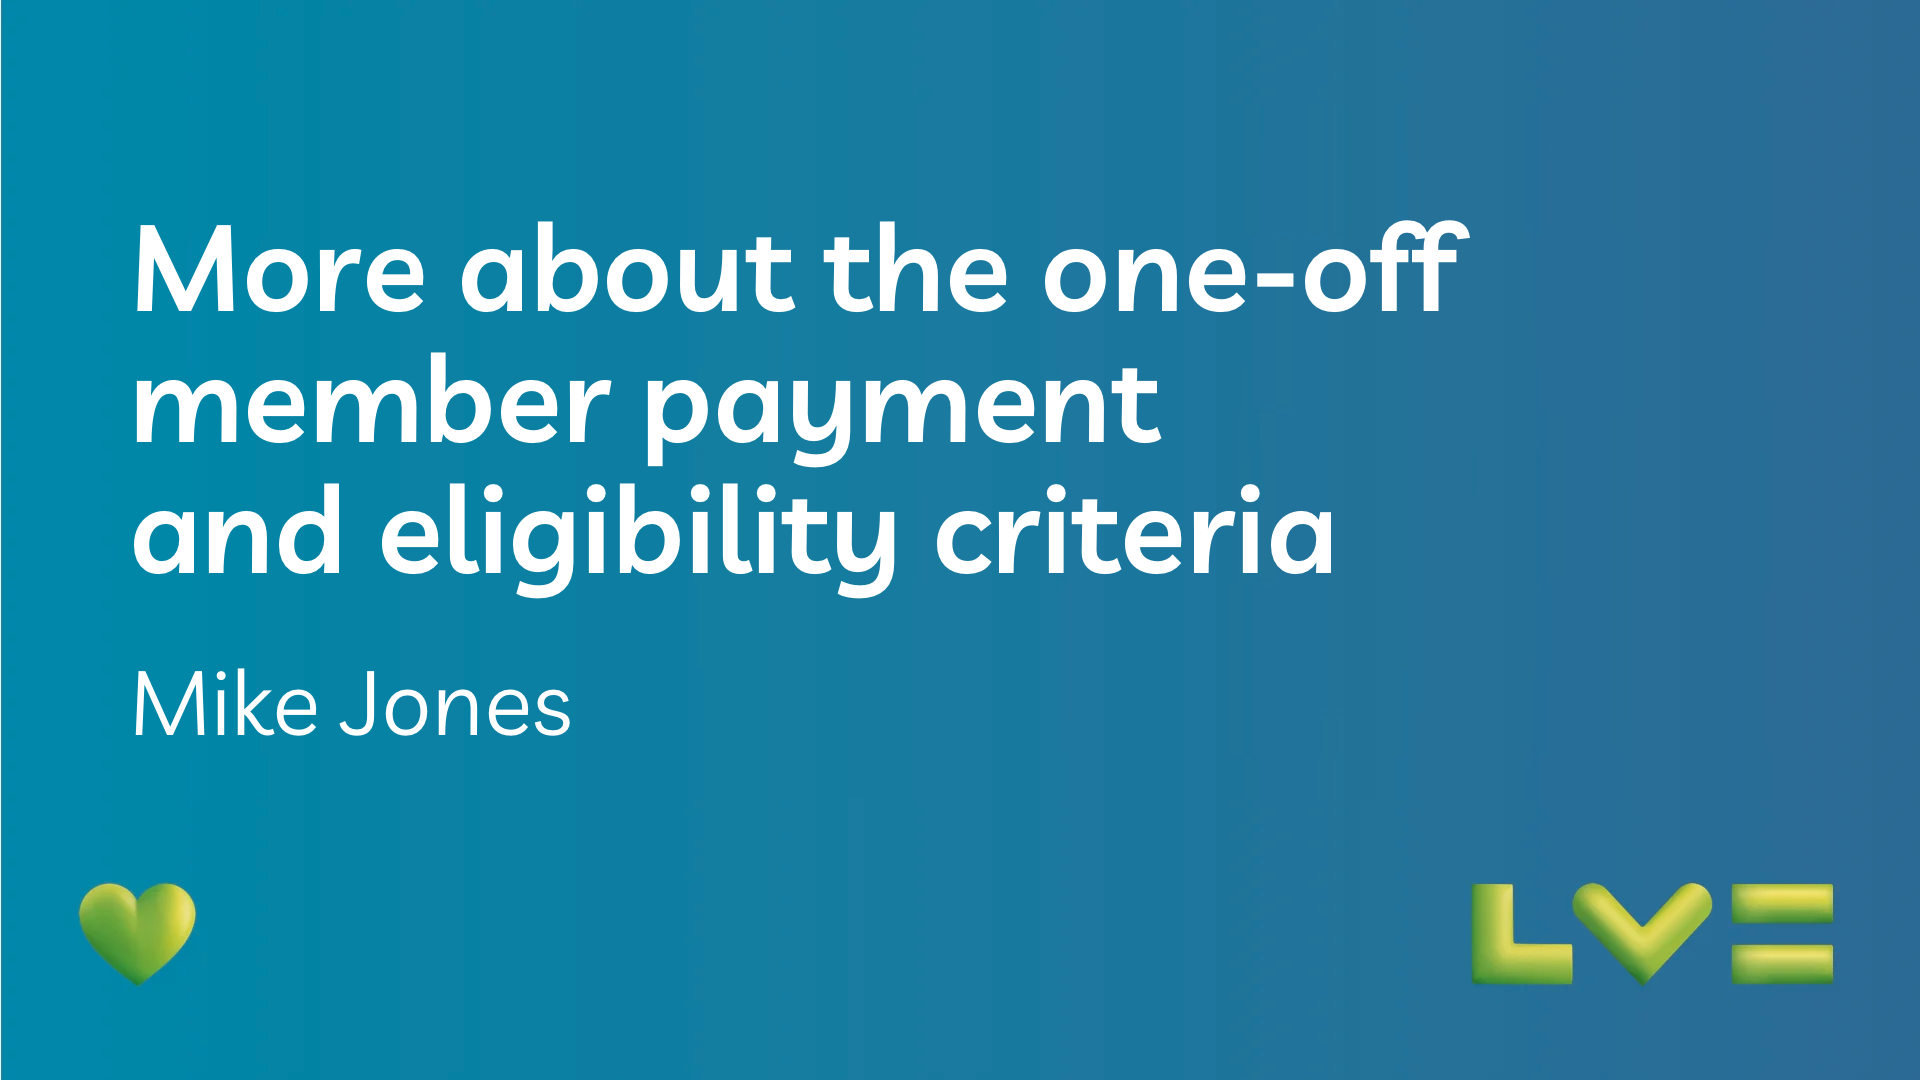 More about the one-off member payment and eligibility criteria